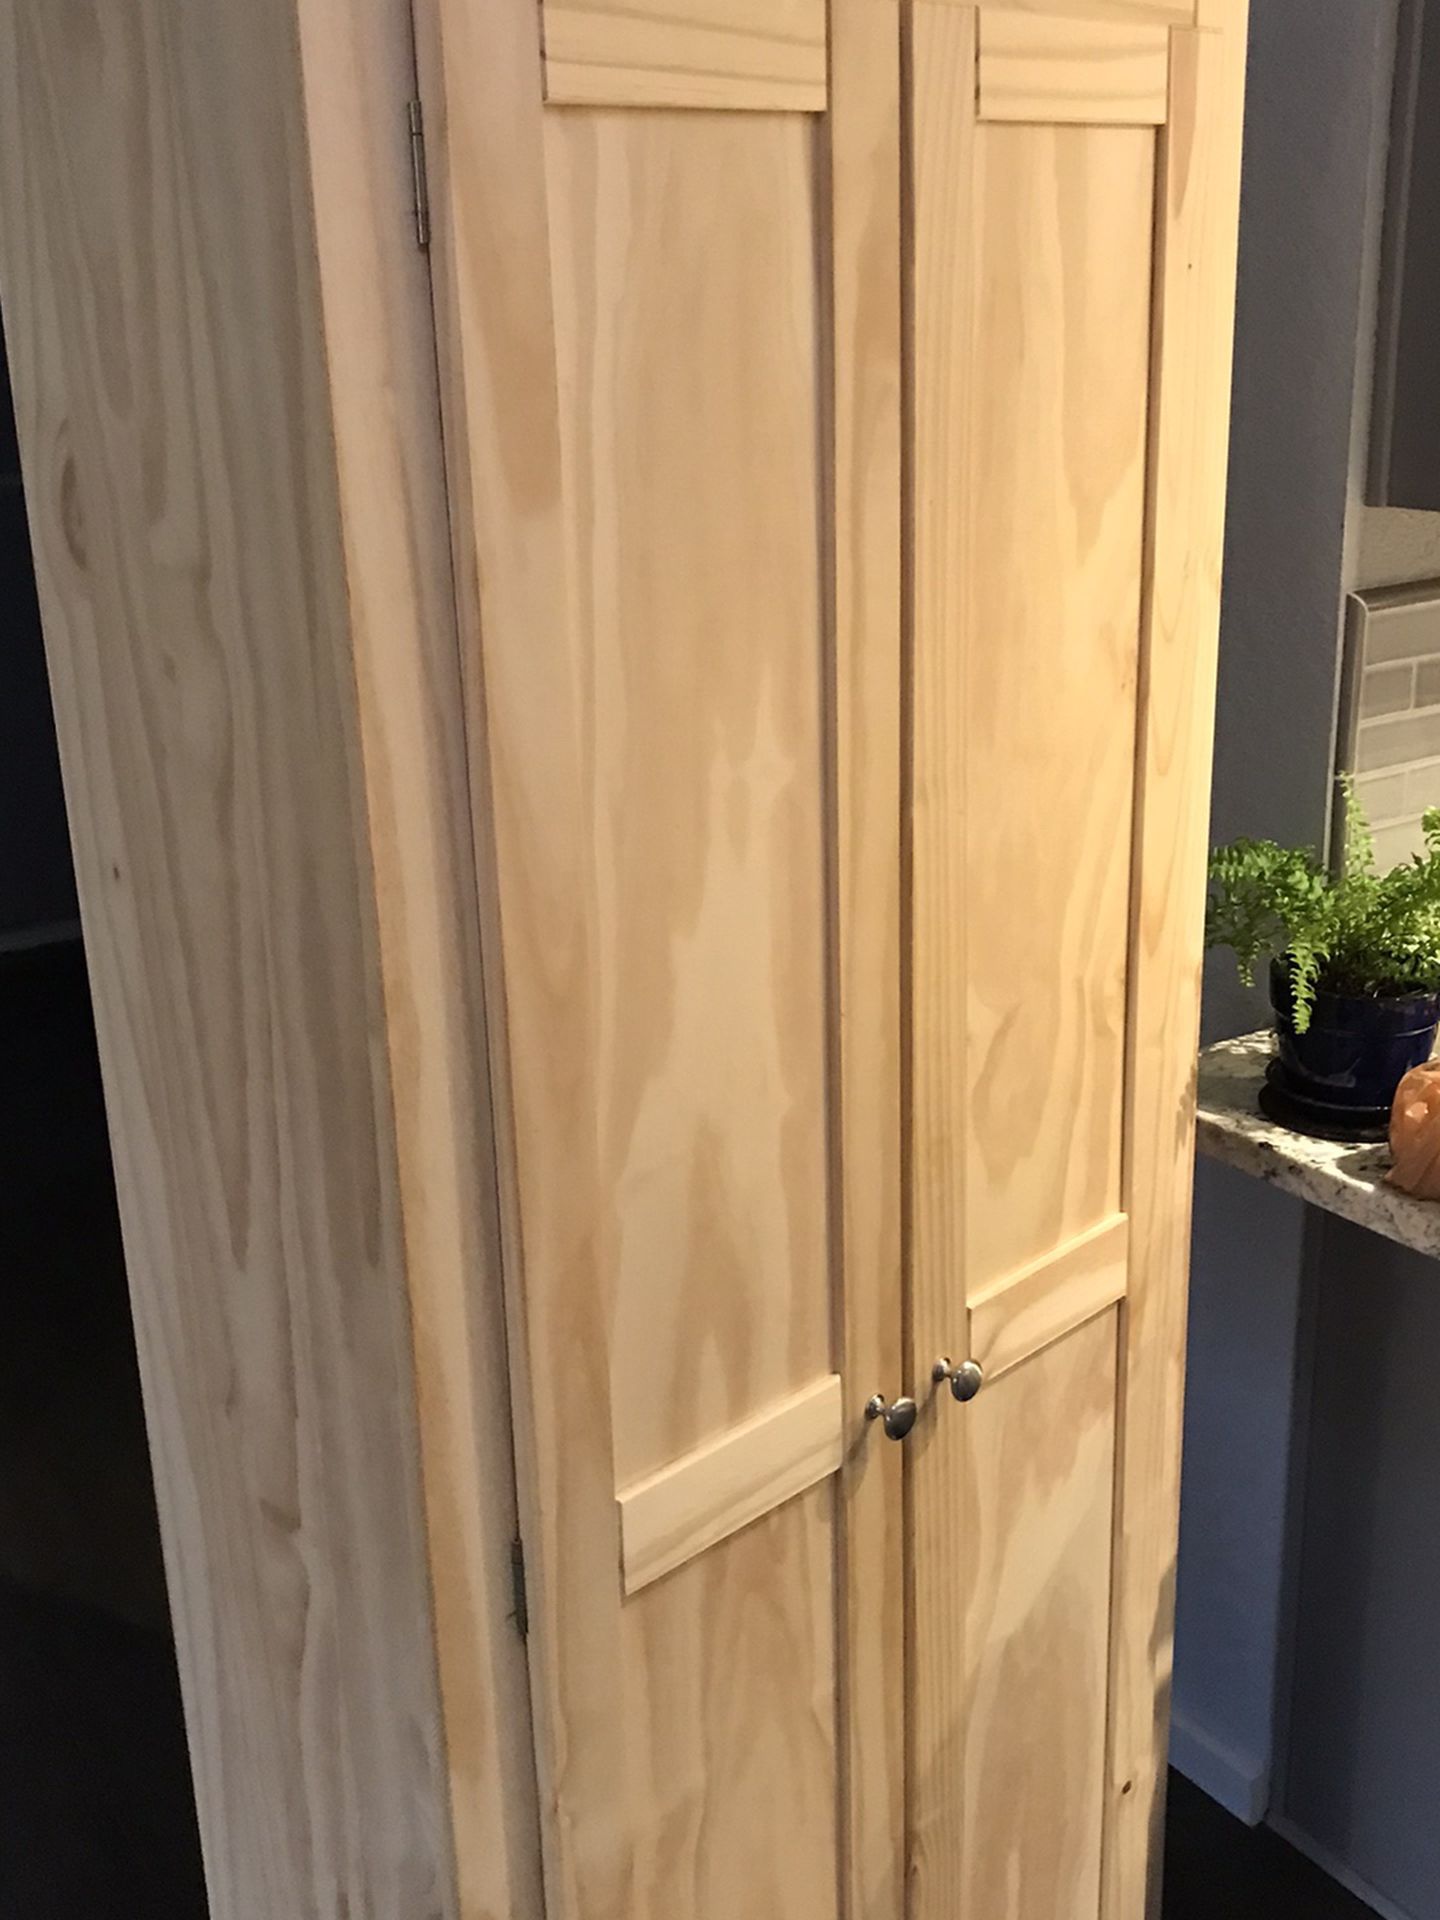 12 Inch Deep Pantry Cabinet Unfinished - Slim Pantry Cabinet Ideas On